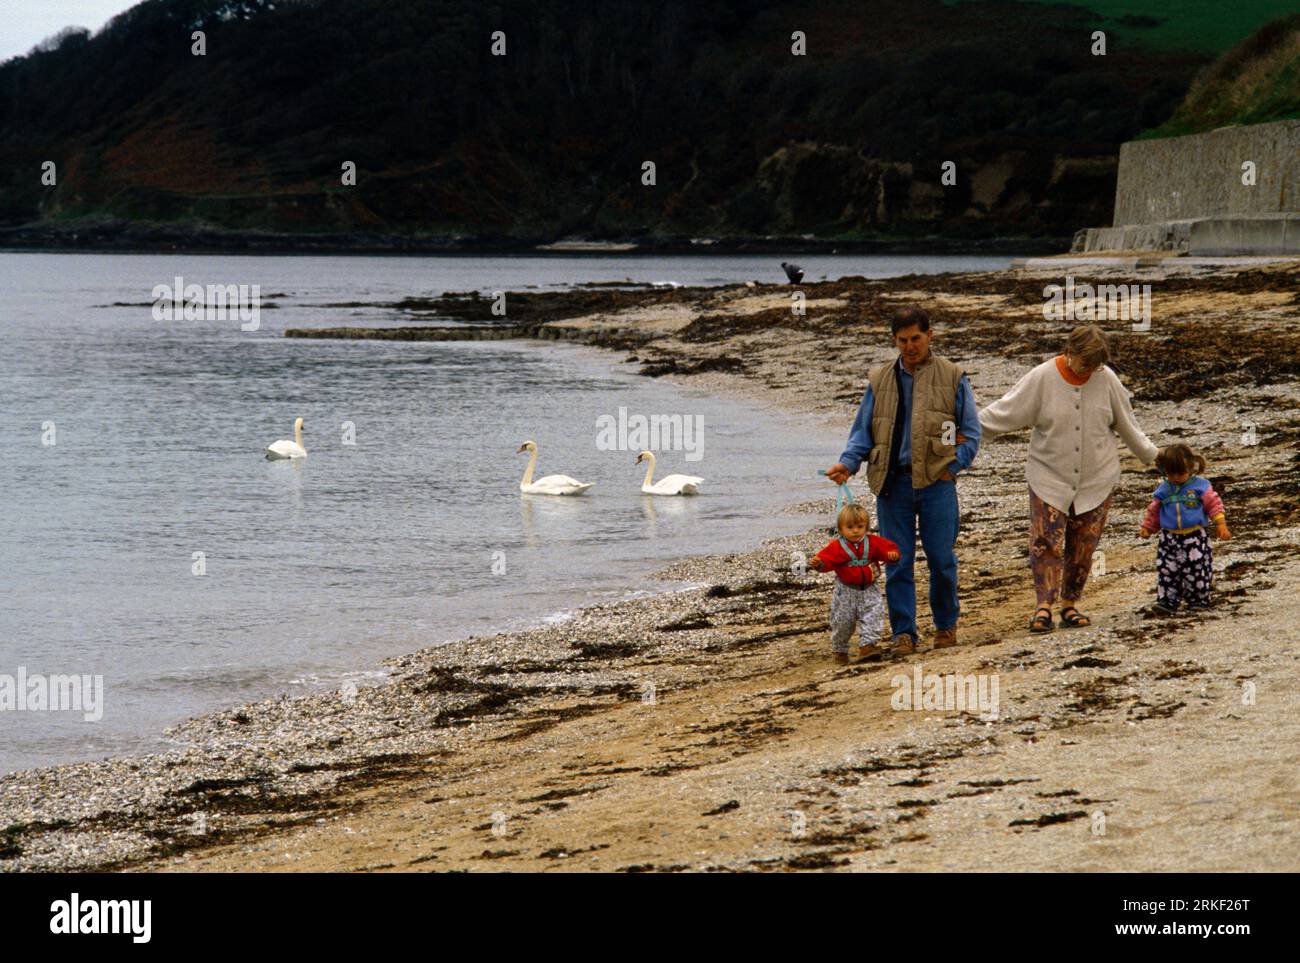 Falmouth Cornwall England Family Walking on Beach And Swans Swimming in Sea Stock Photo